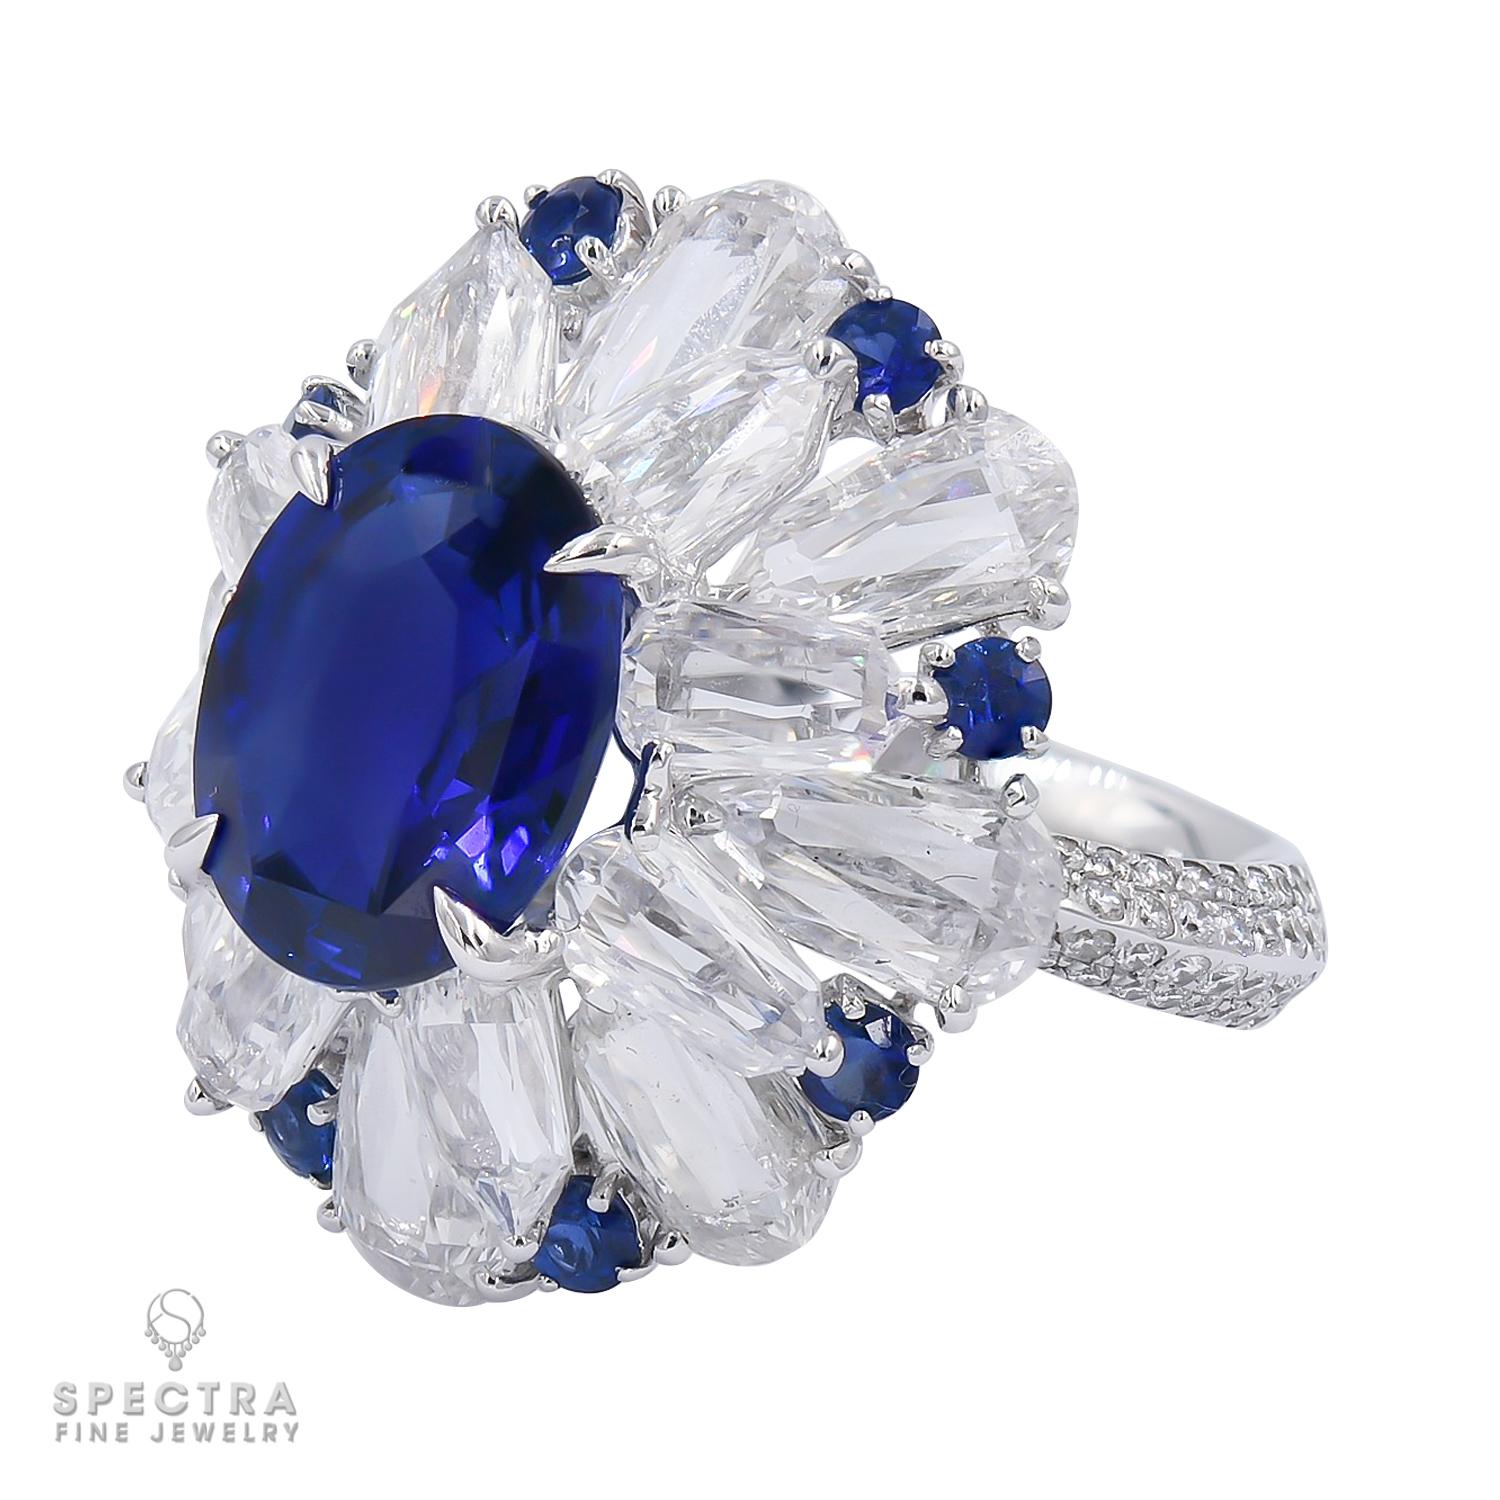 A stunning cocktail ring featuring 5.11 carat oval blue sapphire and diamonds mounted in 18K white gold.
The sapphire is certified by SSEF (Swiss Gemological Institute), stating that it has no indication of heating.
16 round diamonds weighing 6.94